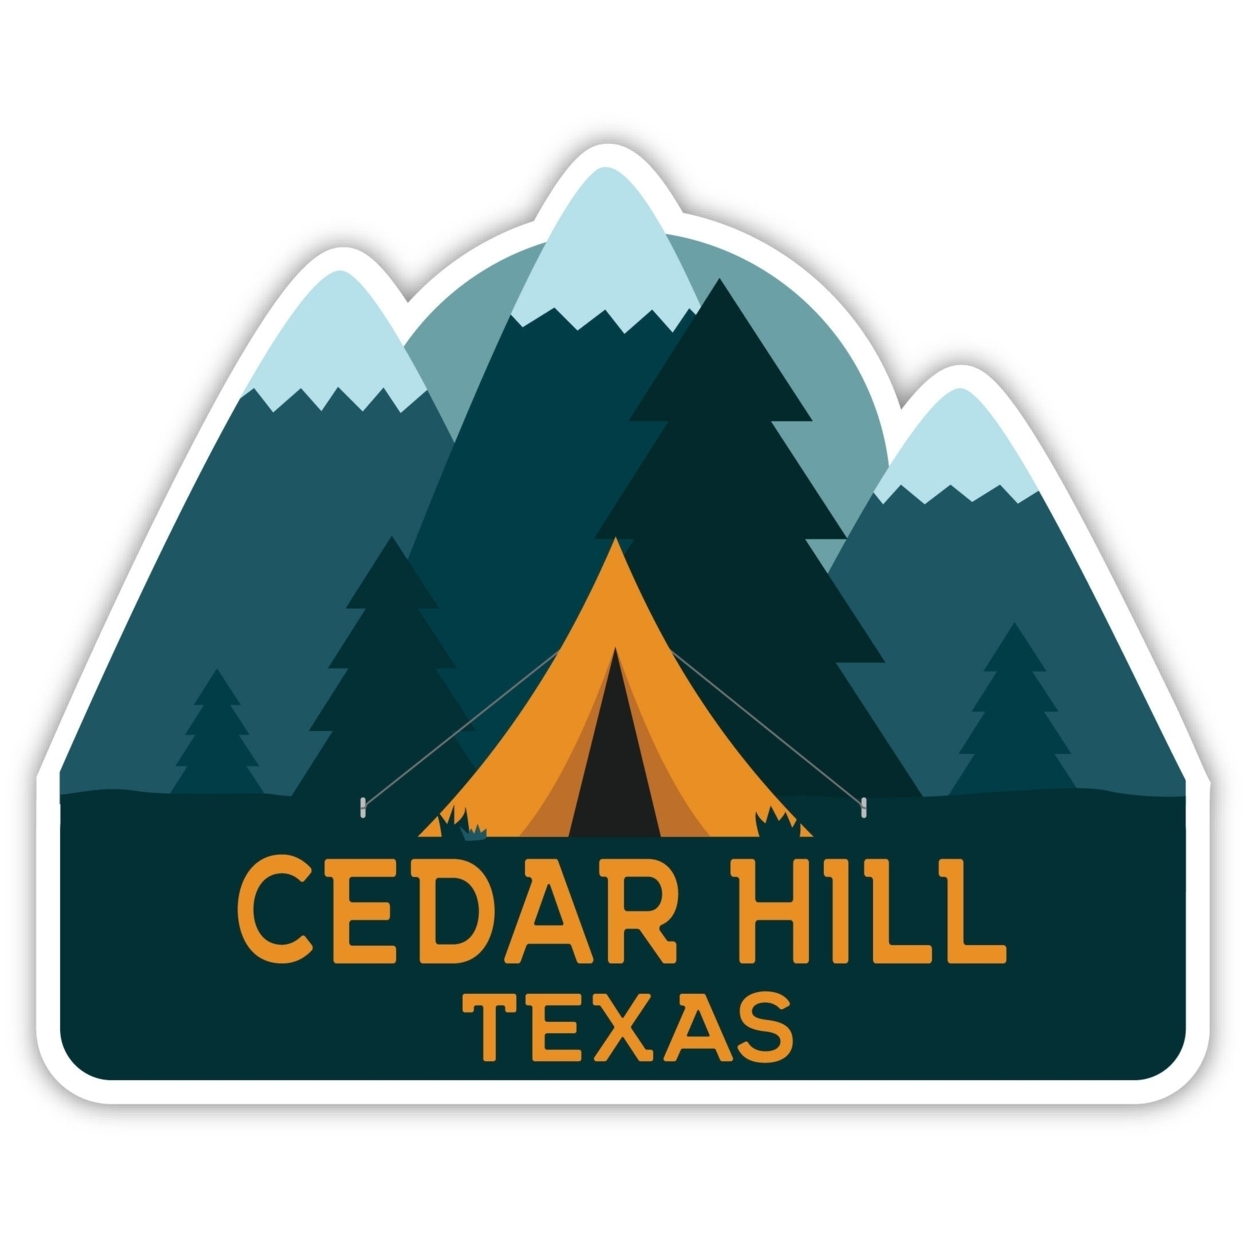 Cedar Hill Texas Souvenir Decorative Stickers (Choose Theme And Size) - 4-Pack, 12-Inch, Tent